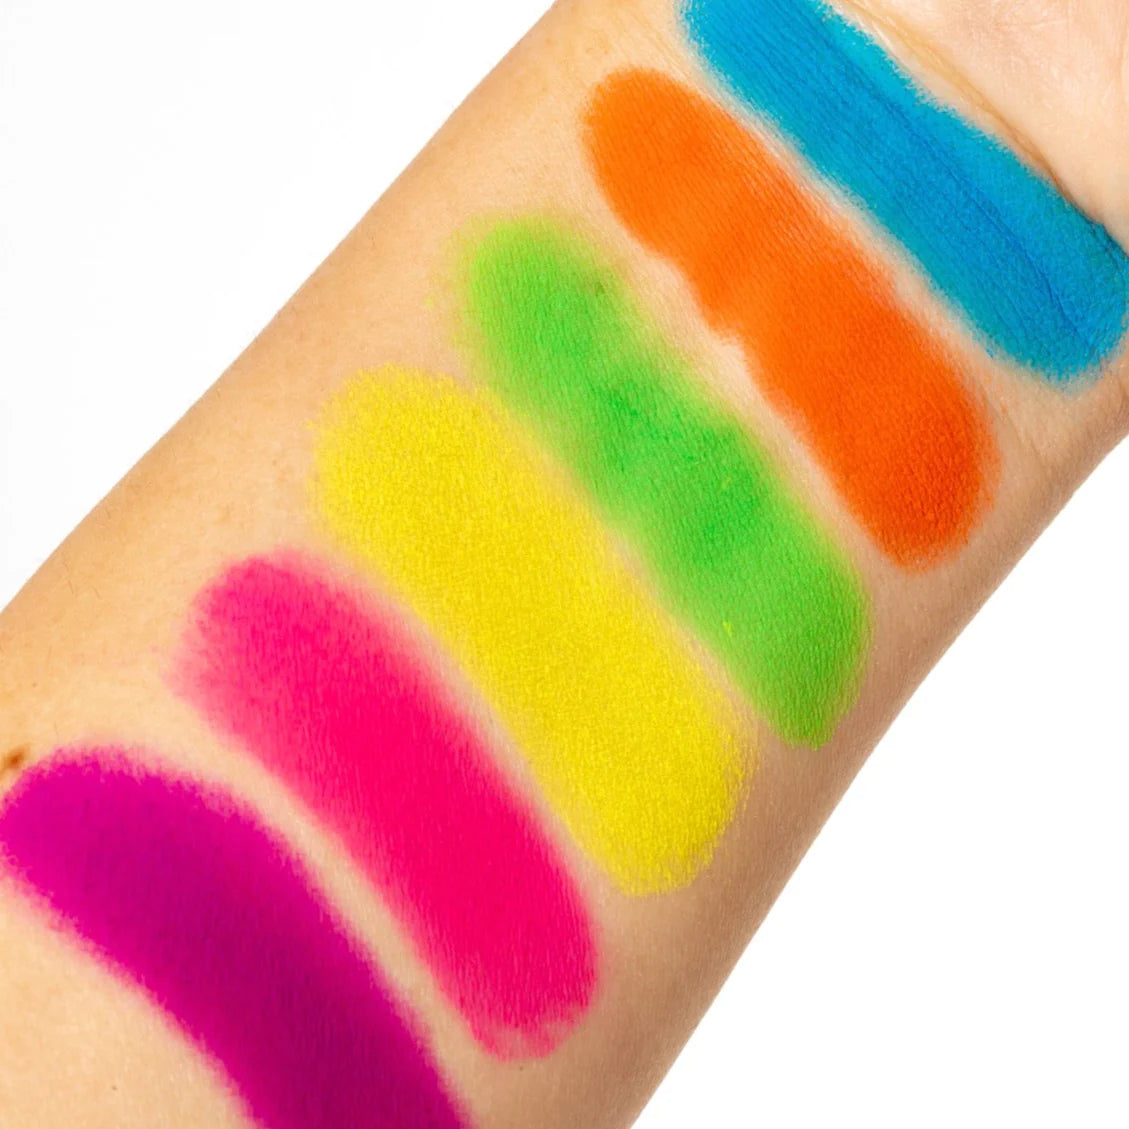 beauty creations dear to be new 6 piece pigment set